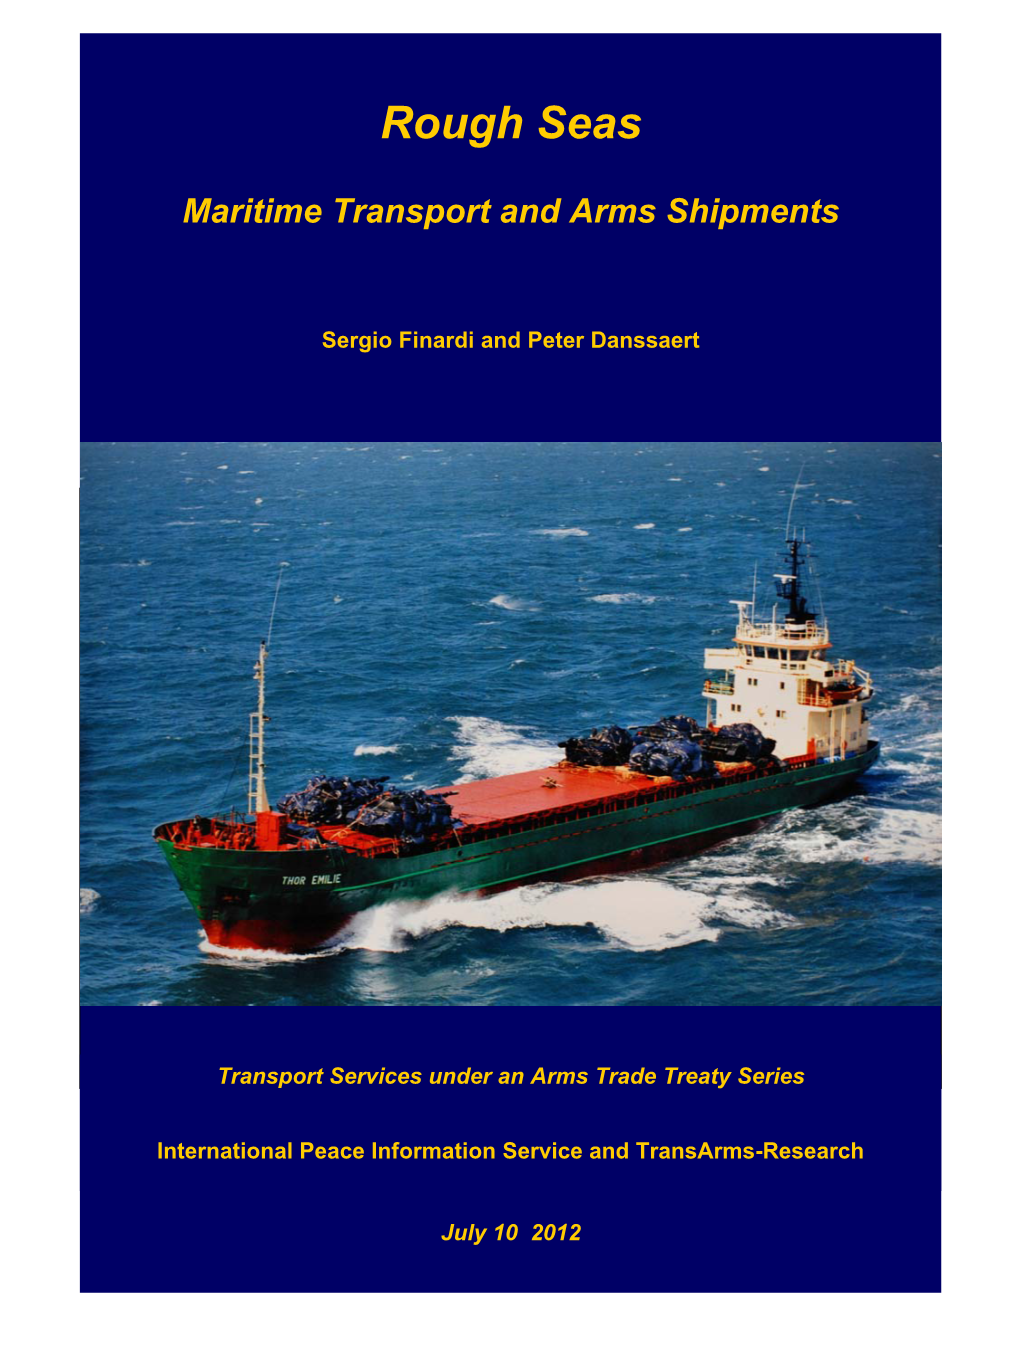 Rough Seas: Maritime Transport and Arms Shipments